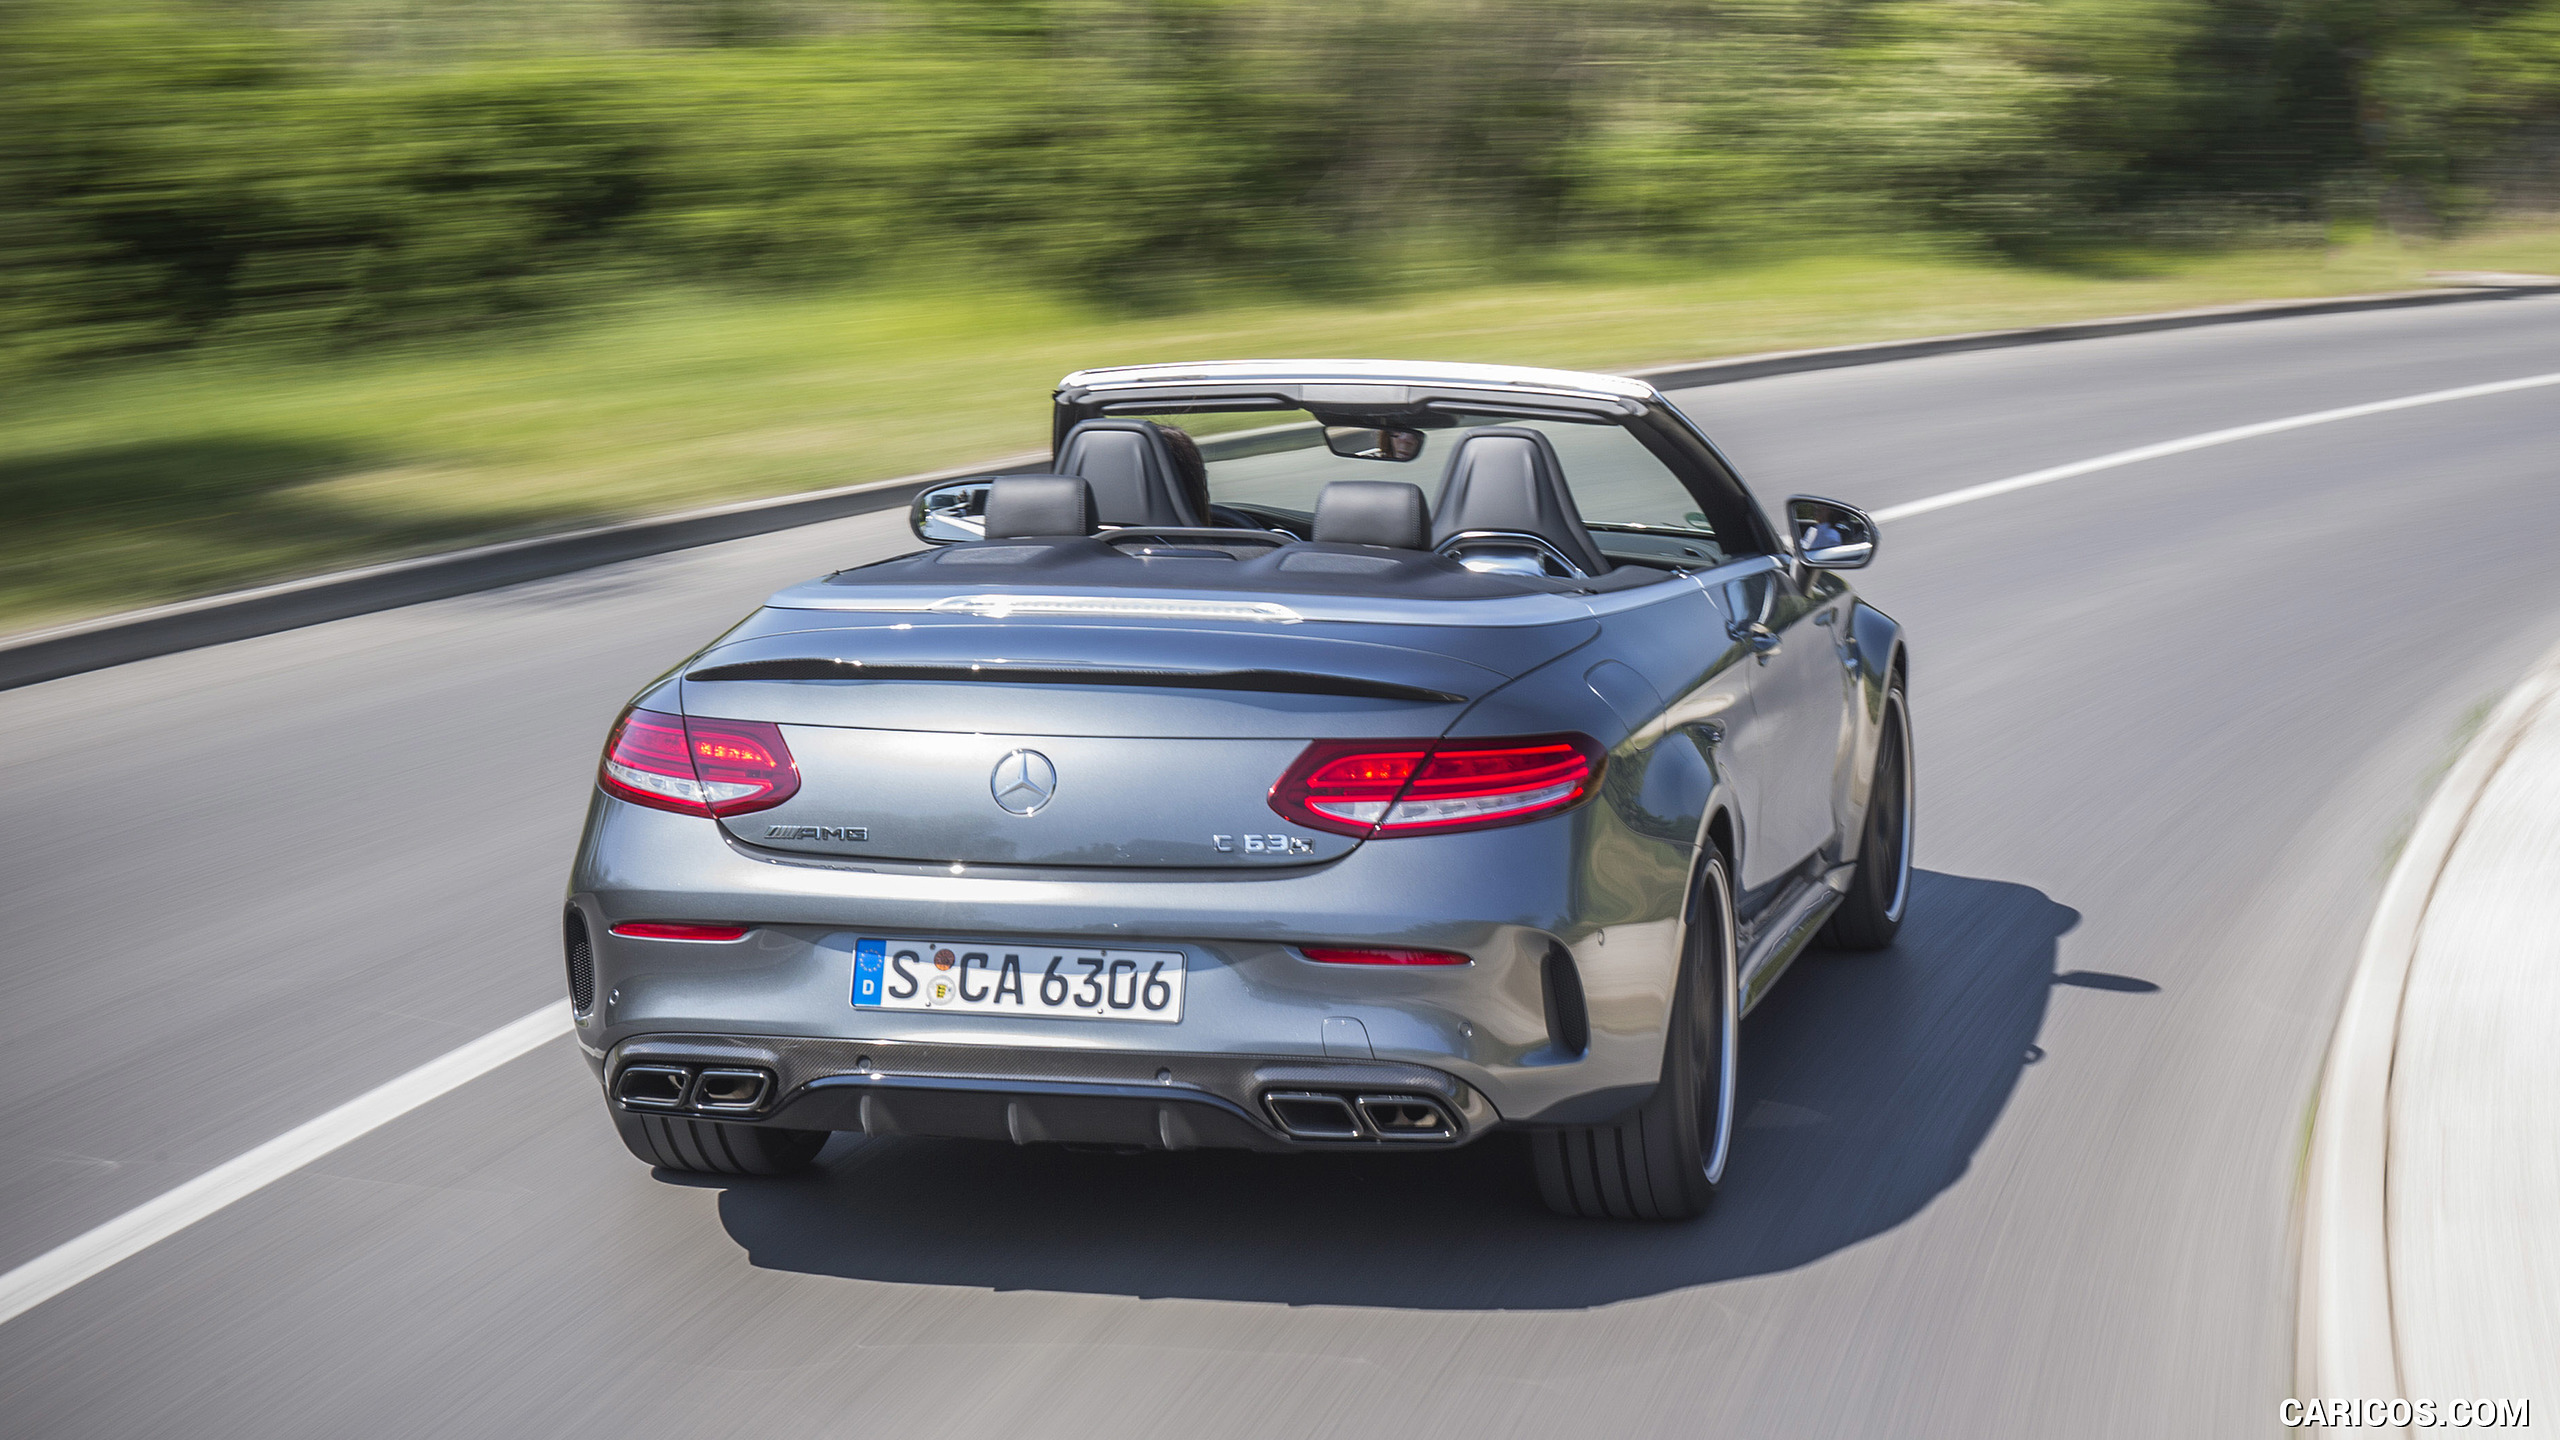 2017 Mercedes-AMG C63 S Cabriolet - Rear, #29 of 222